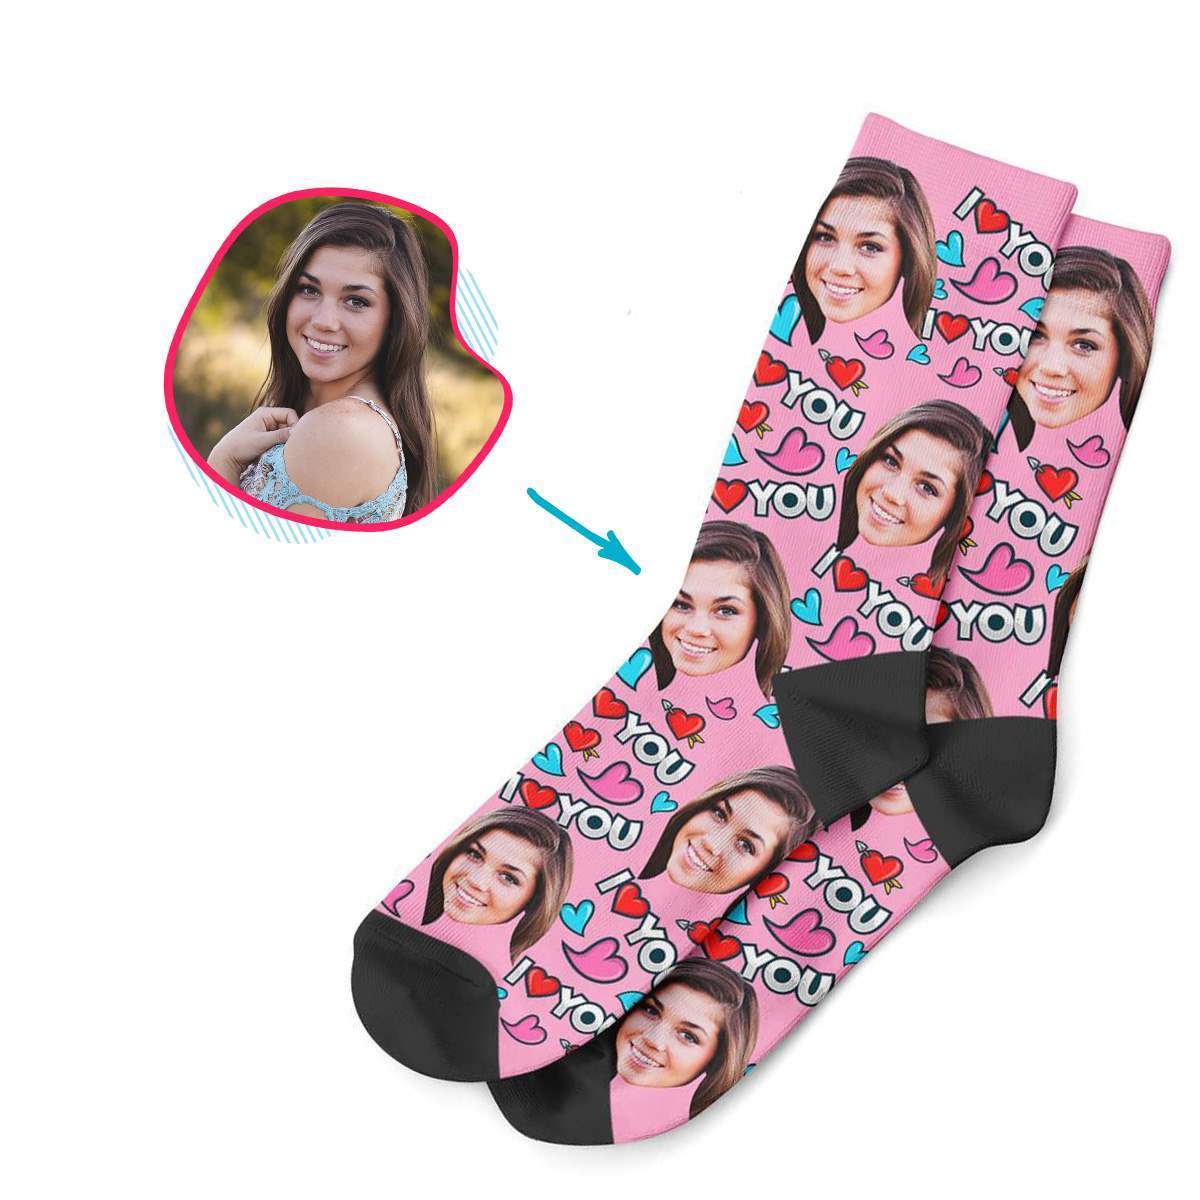 pink Love You socks personalized with photo of face printed on them